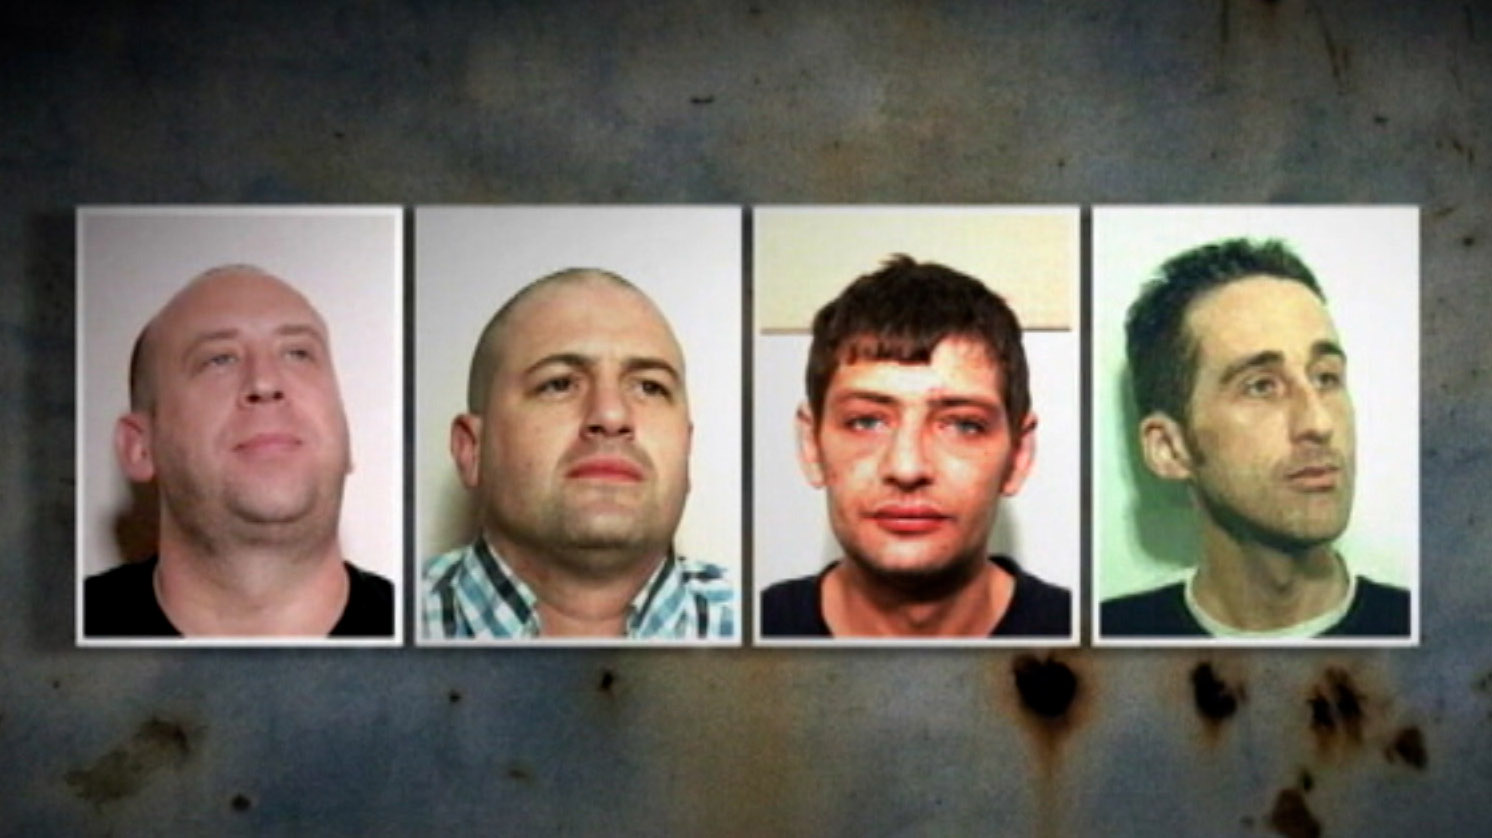 The four men convicted following the torture and murder of Lynda Spence